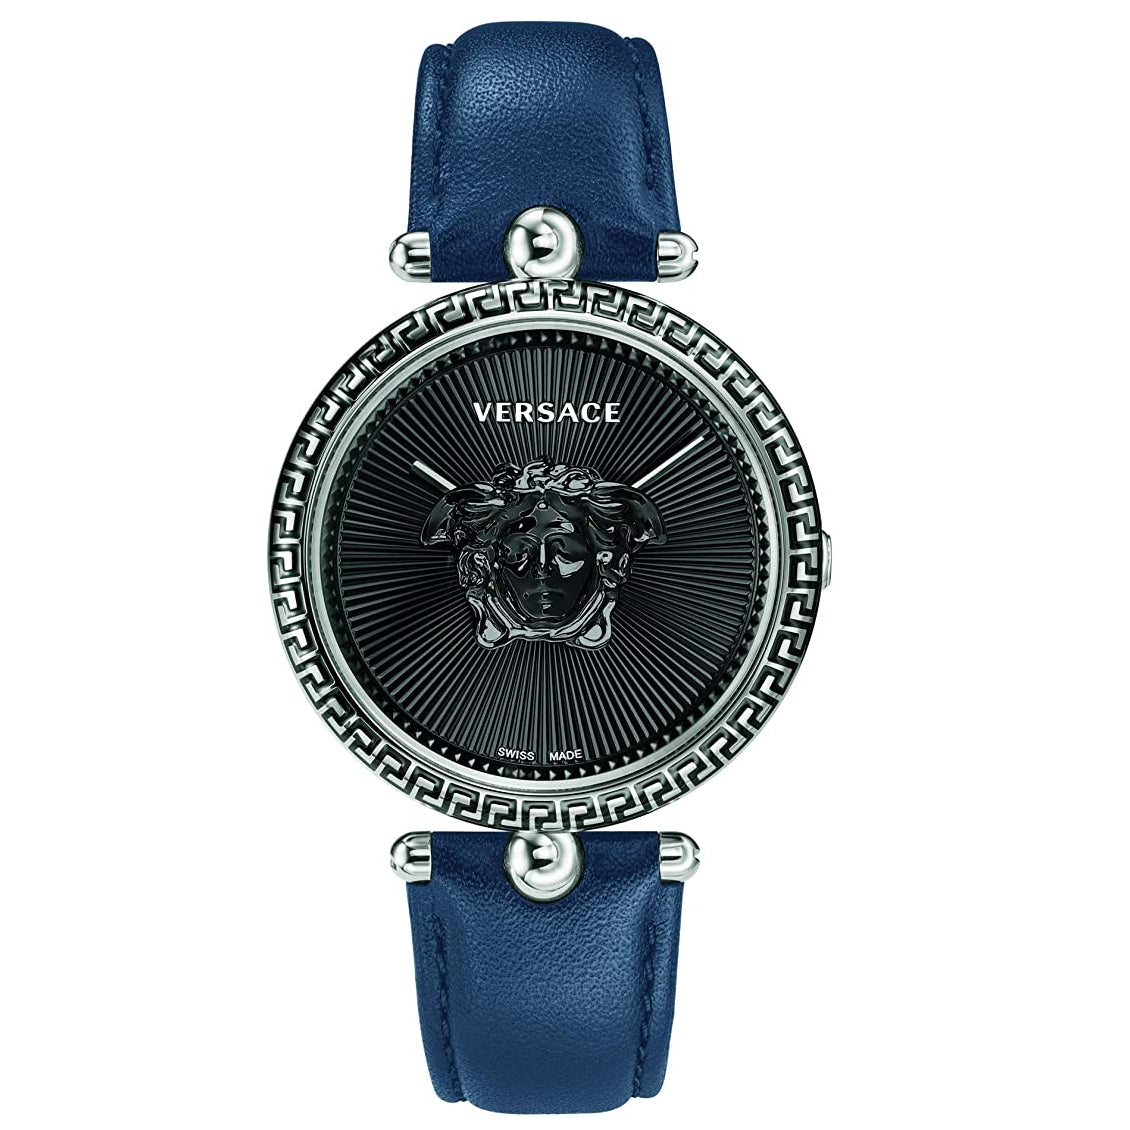 Versace VCO080017 Palazzo Empire Analouge Womens Blue Leather Black 39 Mm Dial Swiss Quartz Watch